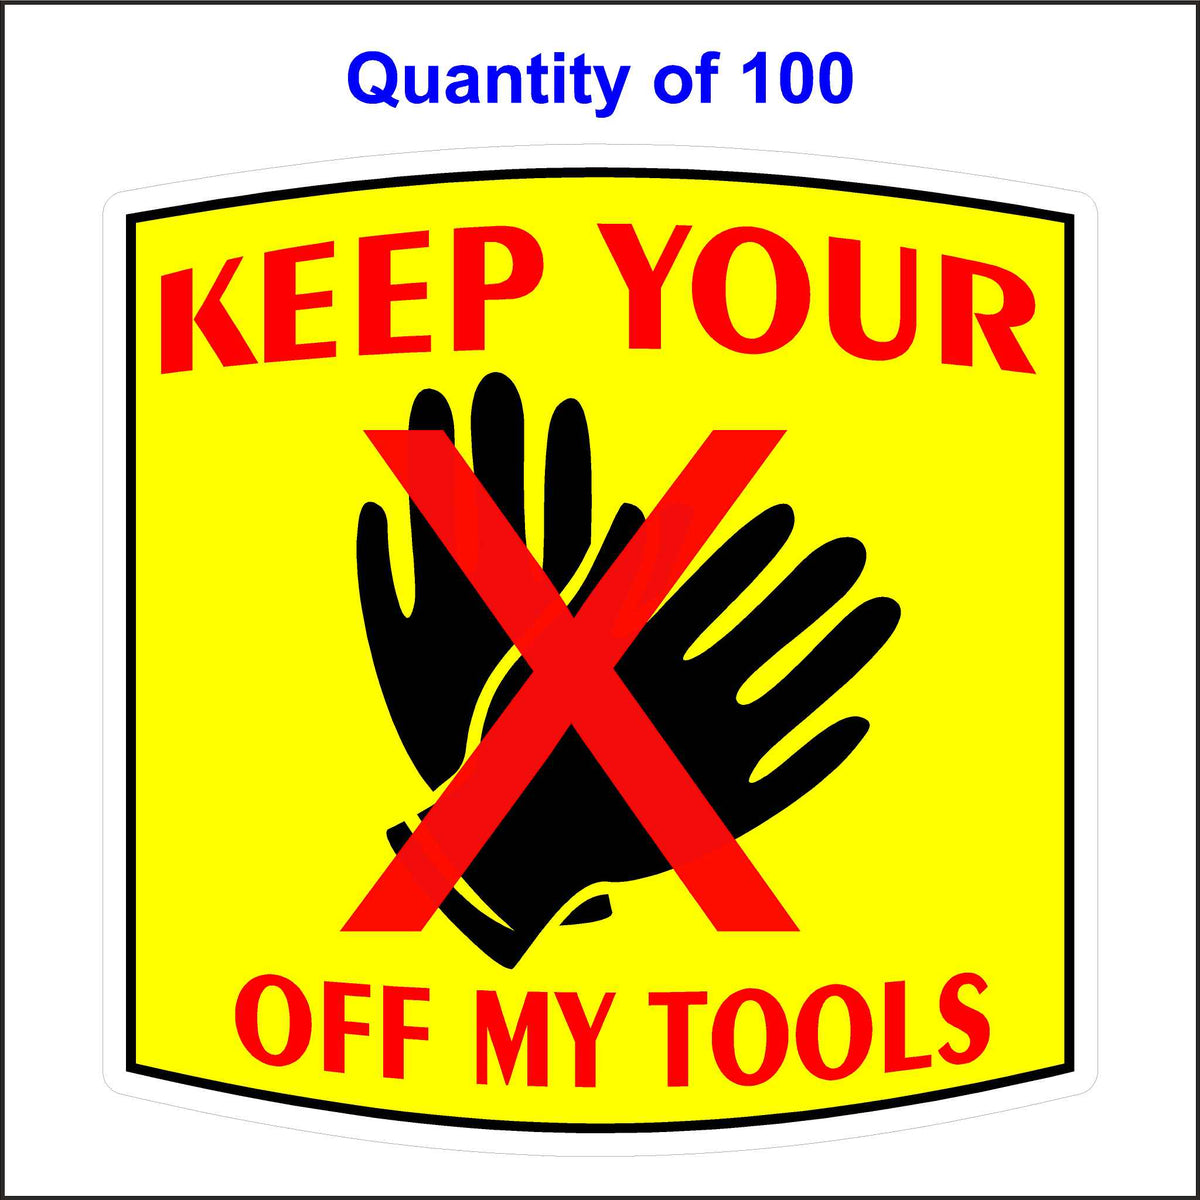 Keep Your Hands off My Tools Sticker. Yellow Background, Black Hands and Red Lettering. 100 Quantity.